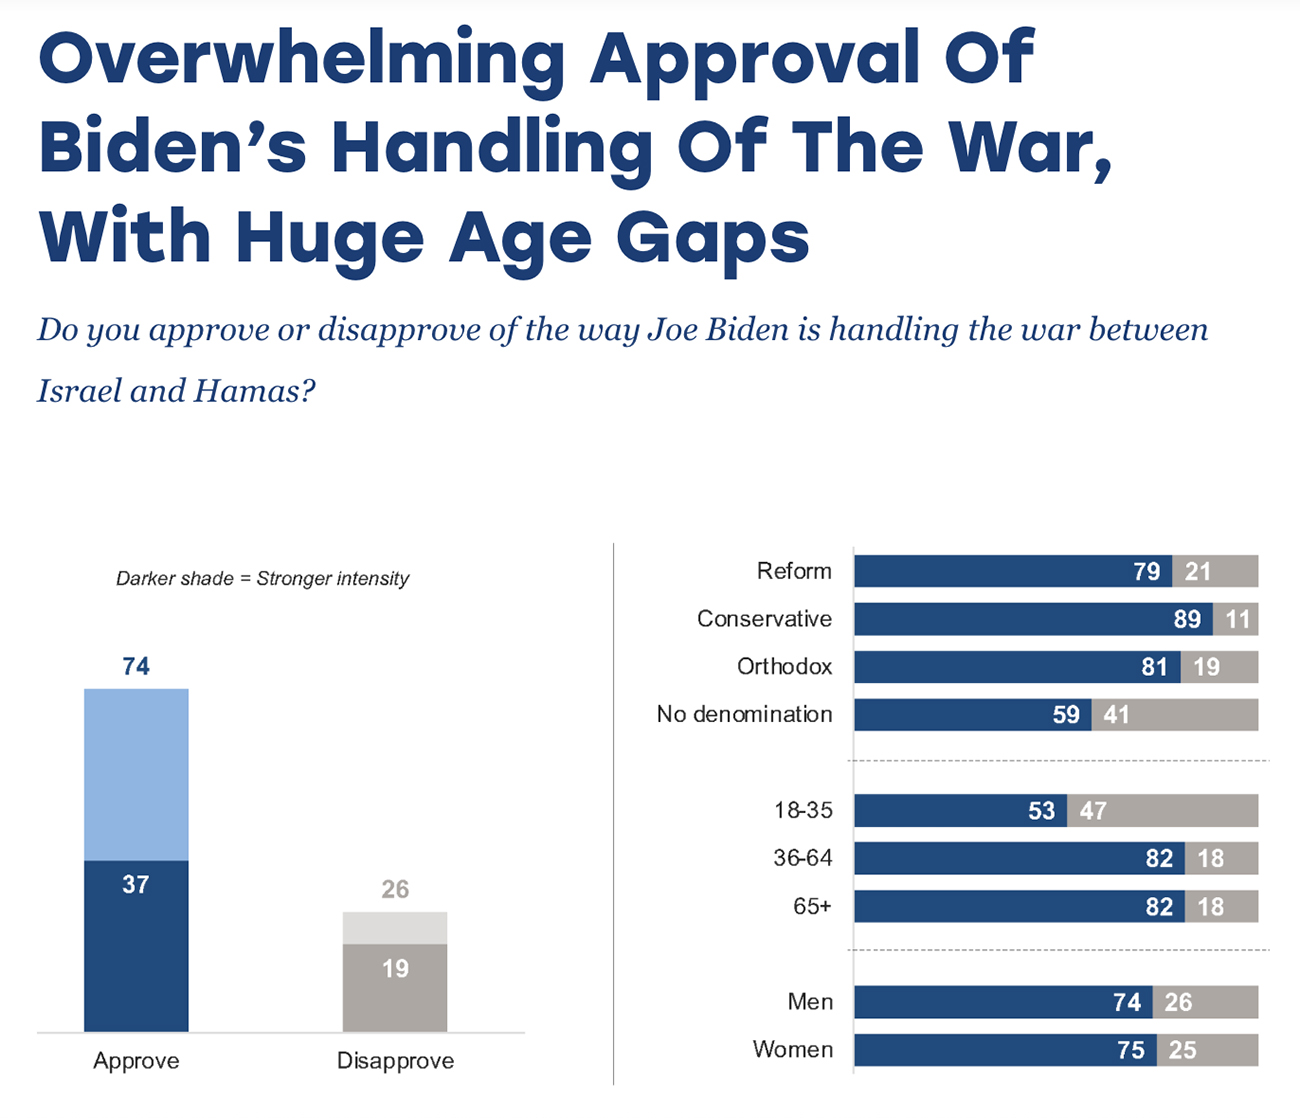 “Overwhelming Approval Of Biden’s Handling Of The War, With Huge Age Gaps” (Graphic courtesy Jewish Electorate Institute)